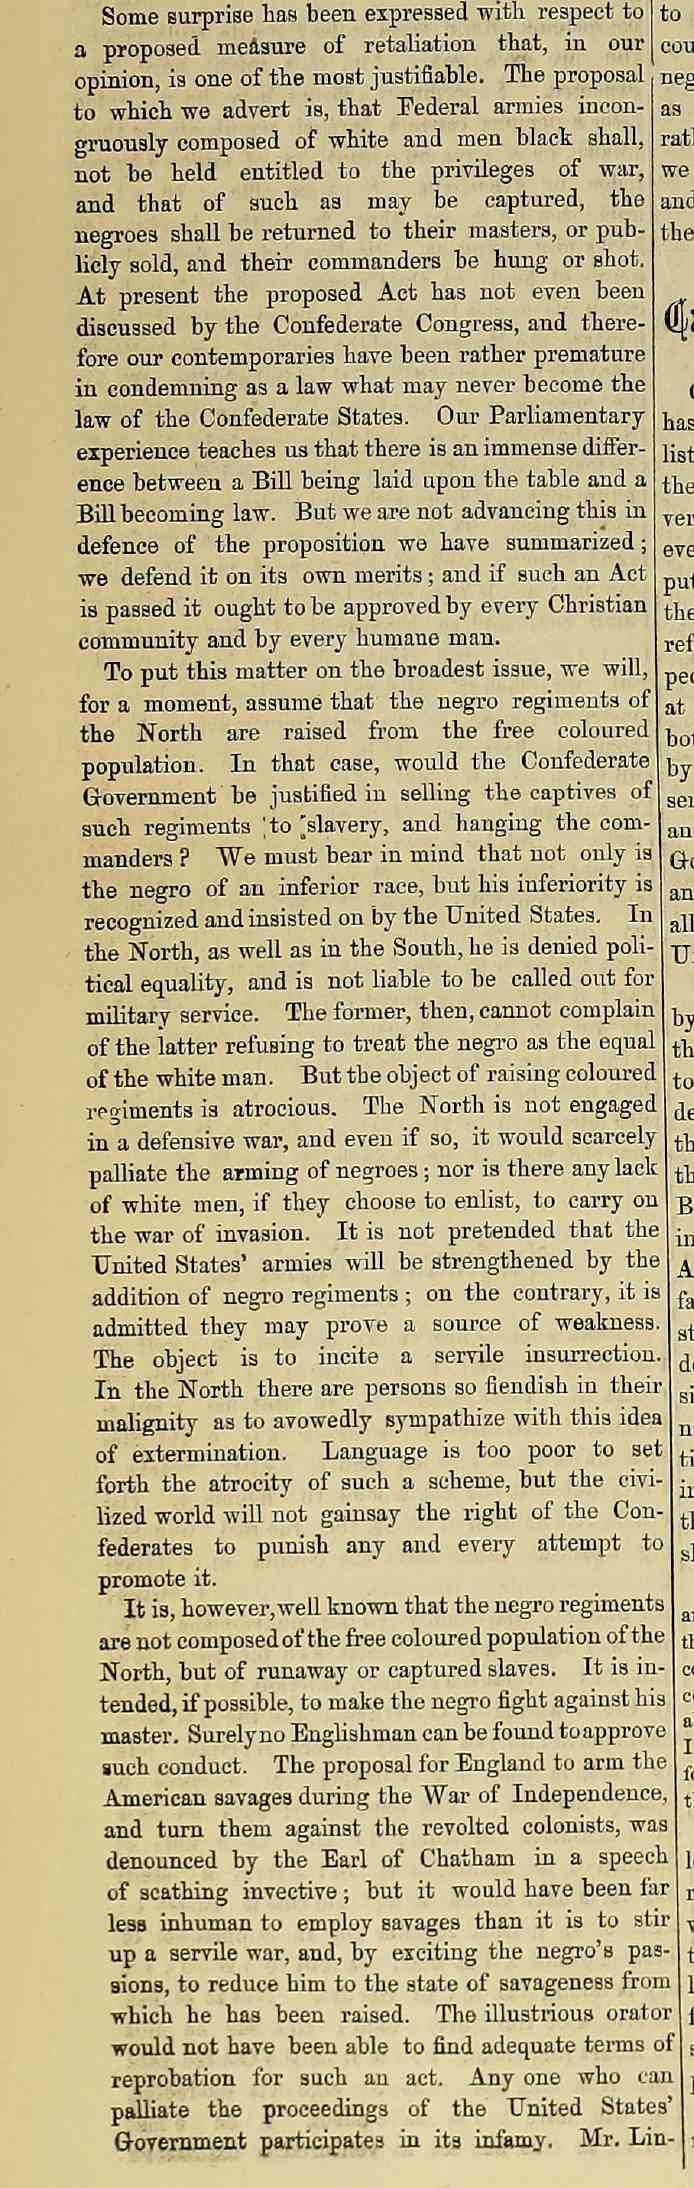 Opinion piece on what the Confederate reaction should be to the Union using African-American troops printed in the September 11, 1862 issue of The Index Column 1